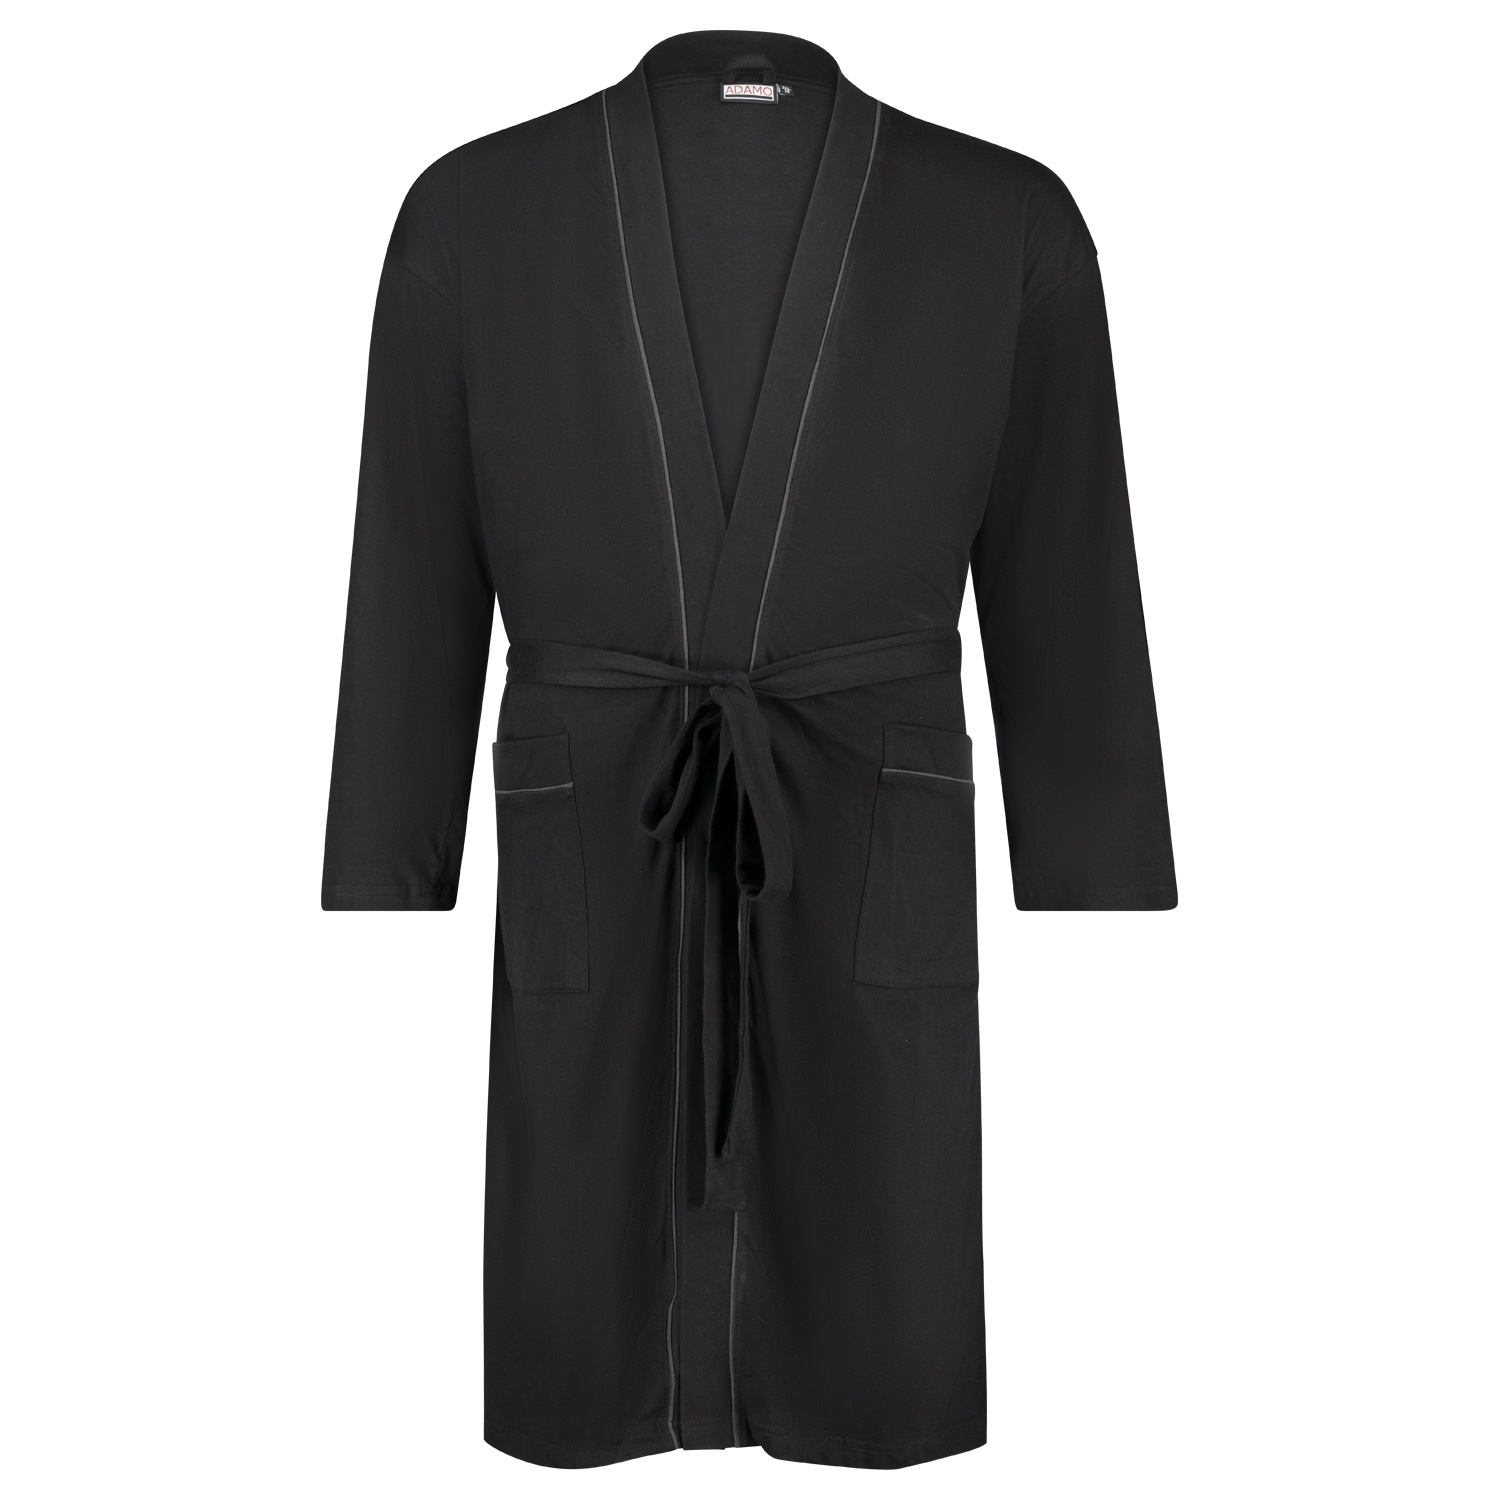 Bathrobe for men in black by ADAMO up to oversize 10XL